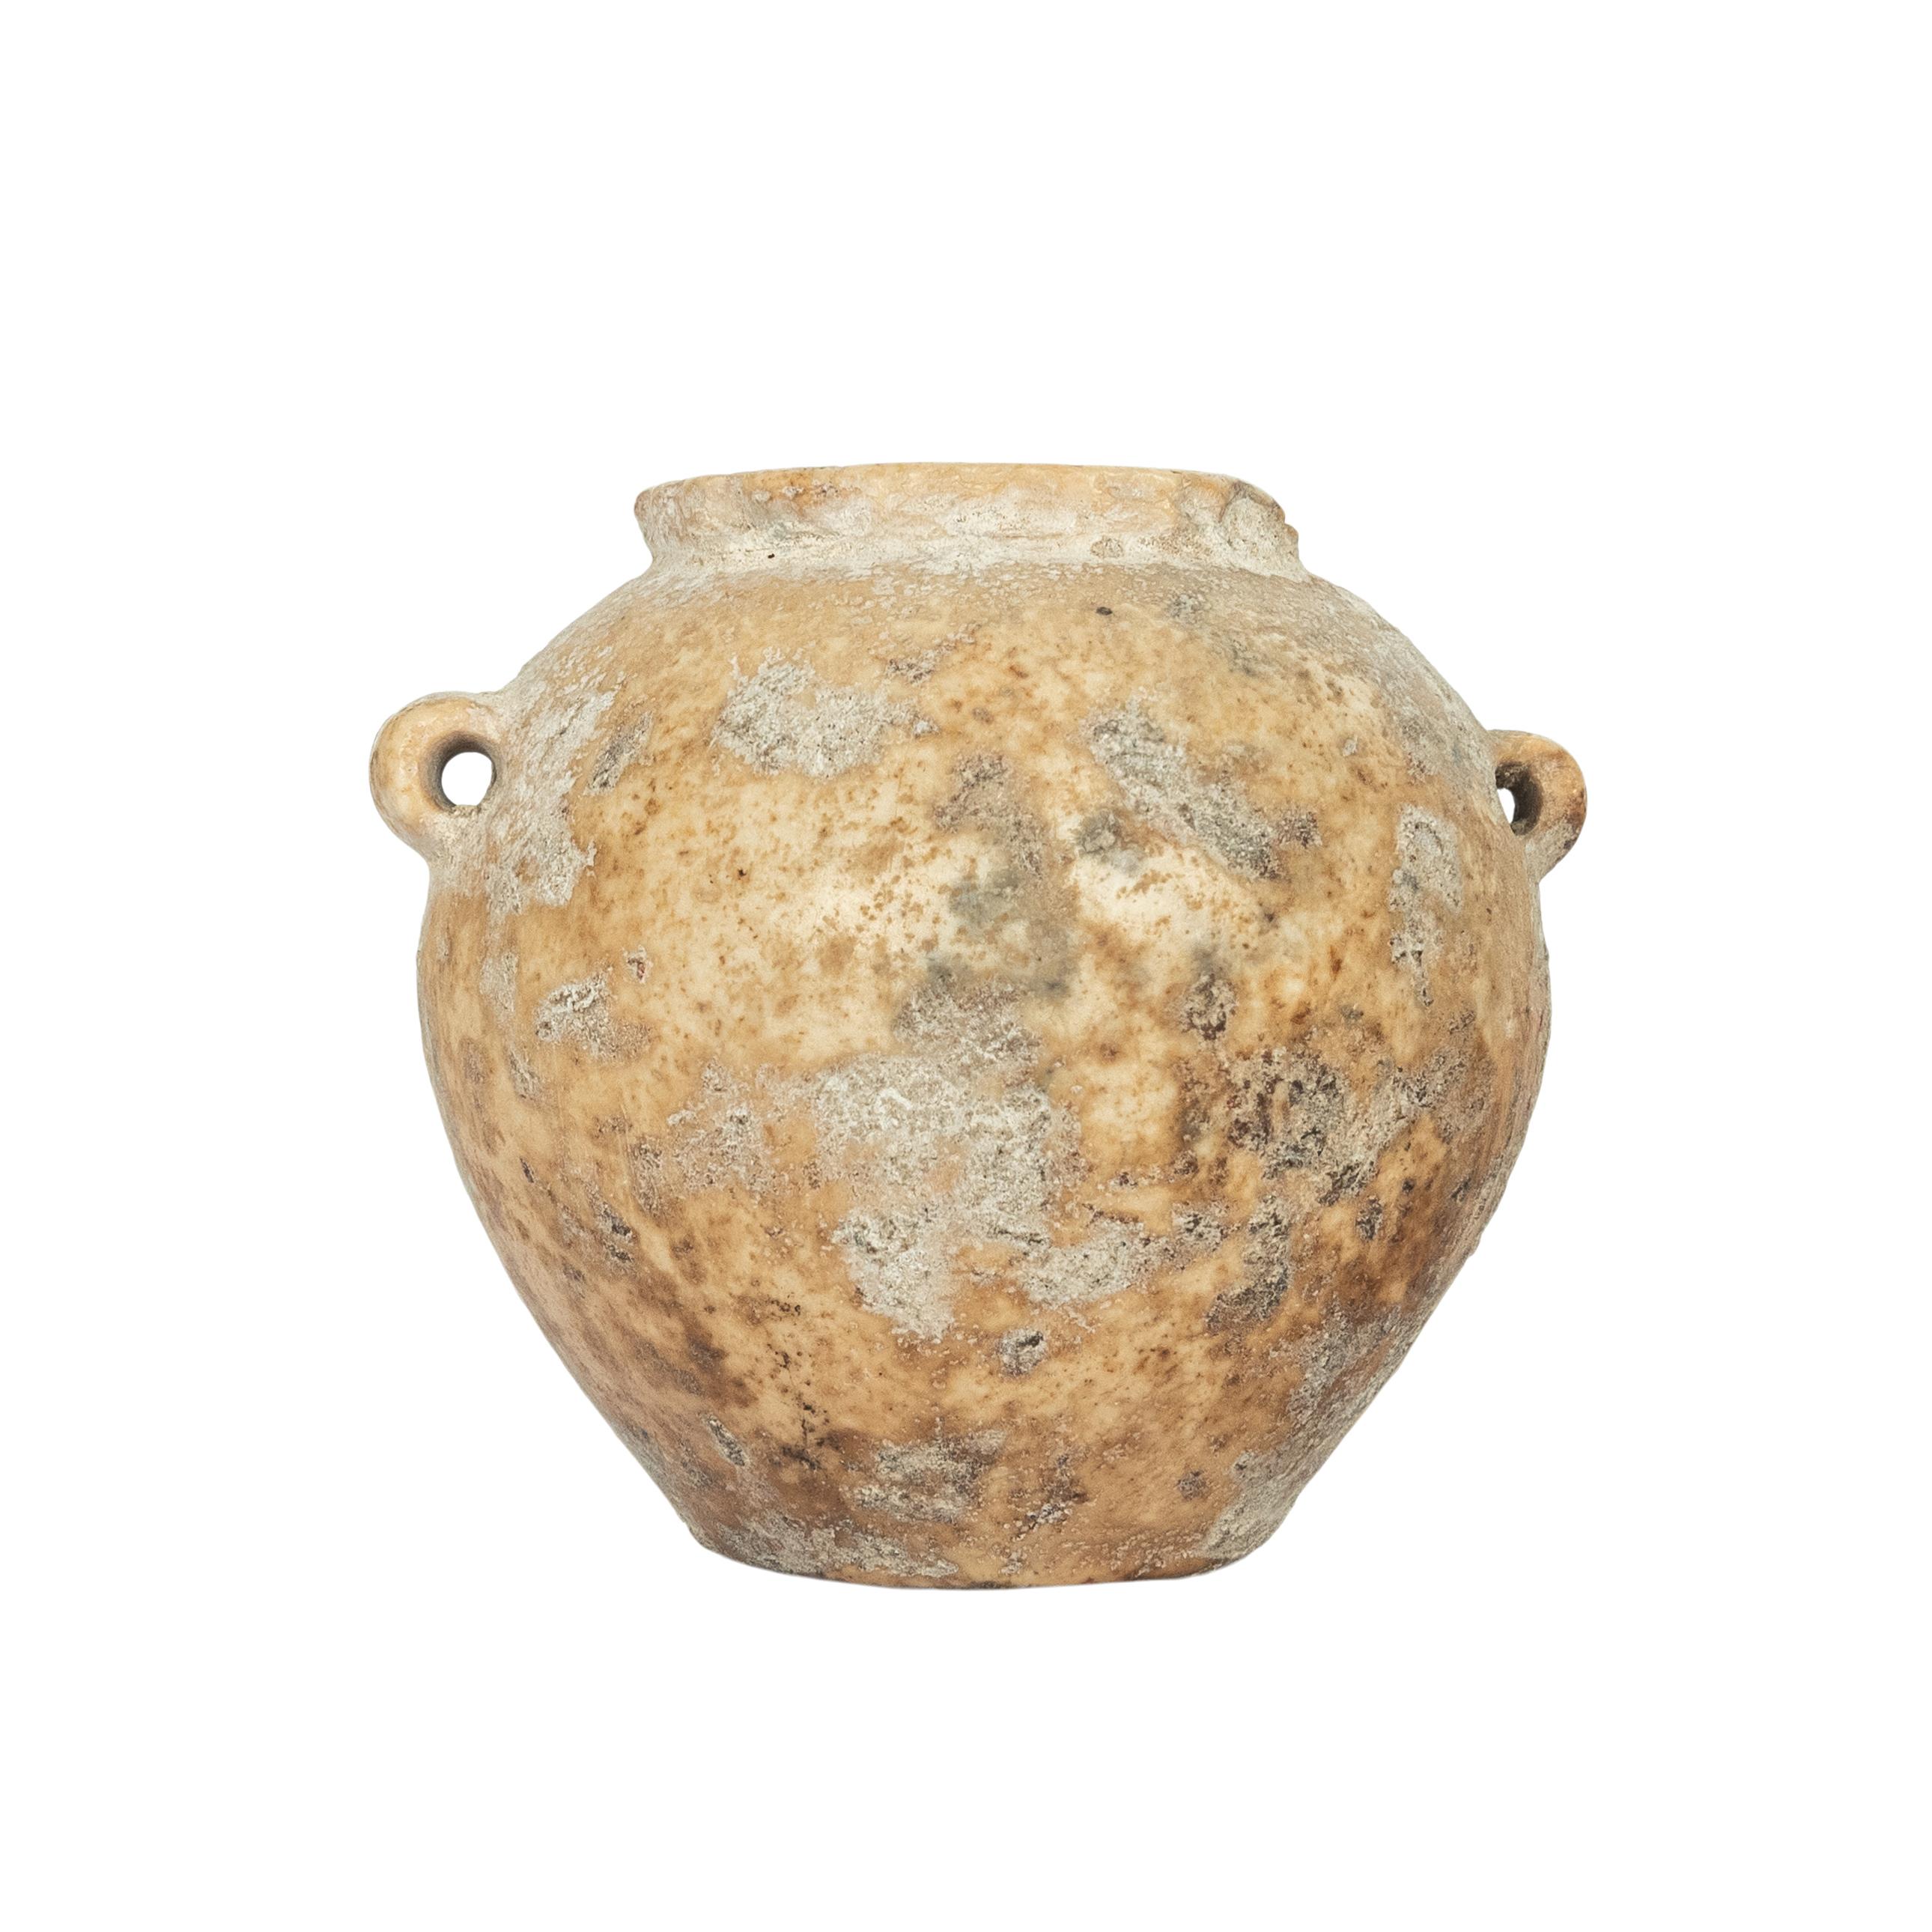 An ancient Egyptian stone vessel/jar, Old Kingdom, 2600-2800 BCE.
This is an original lime stone jar from the time of the pyramid builders, these vessels where hand carved with the use of sand and sometimes rudimentary drills. The squat ovoid vessel